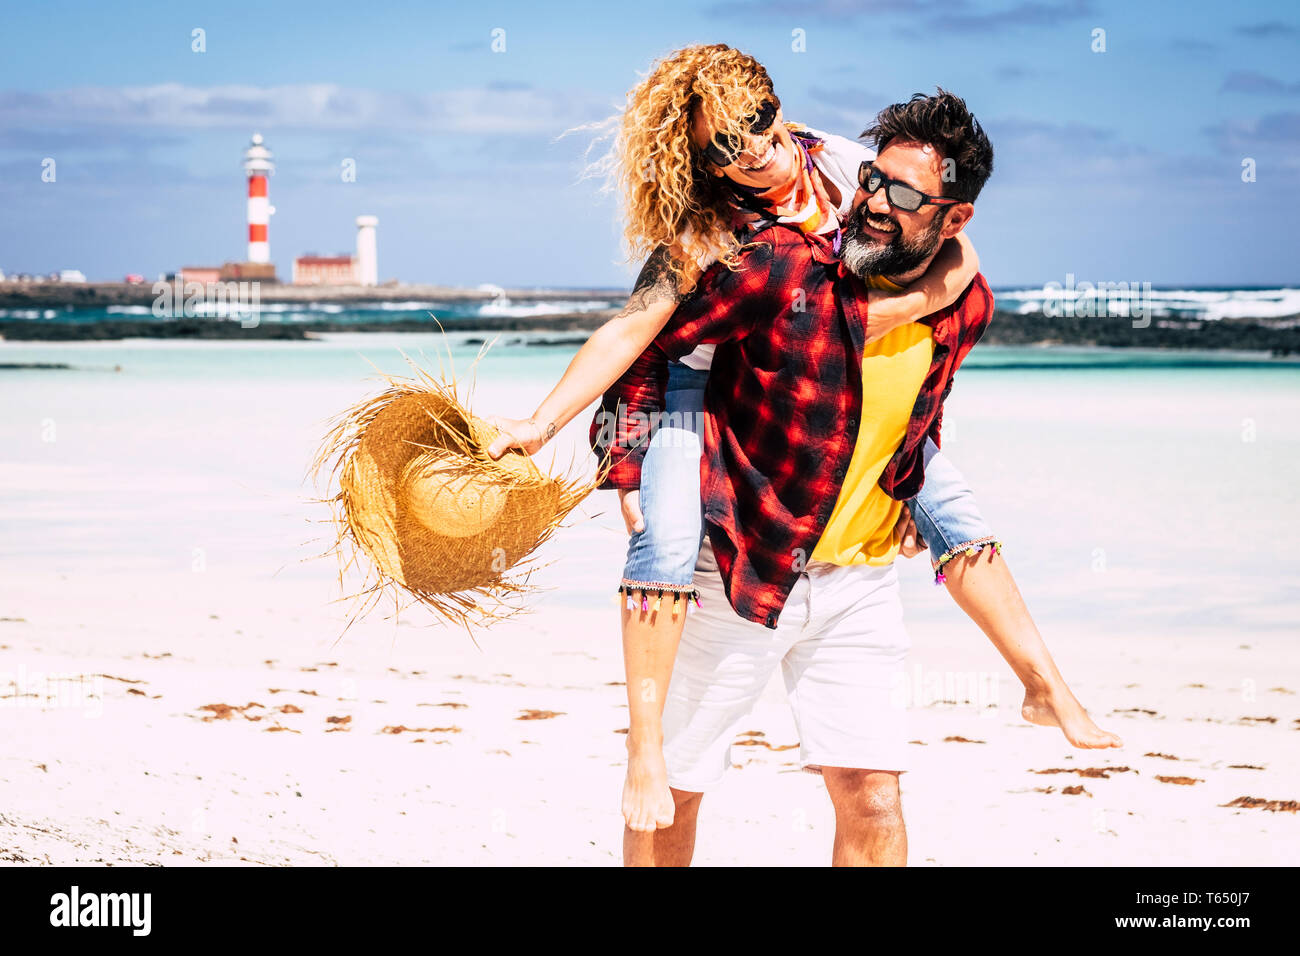 Cheerful people happy joyful couple playing together in love with man carrying woman laughing a lot having fun at the beach in summer holiday vacation Stock Photo